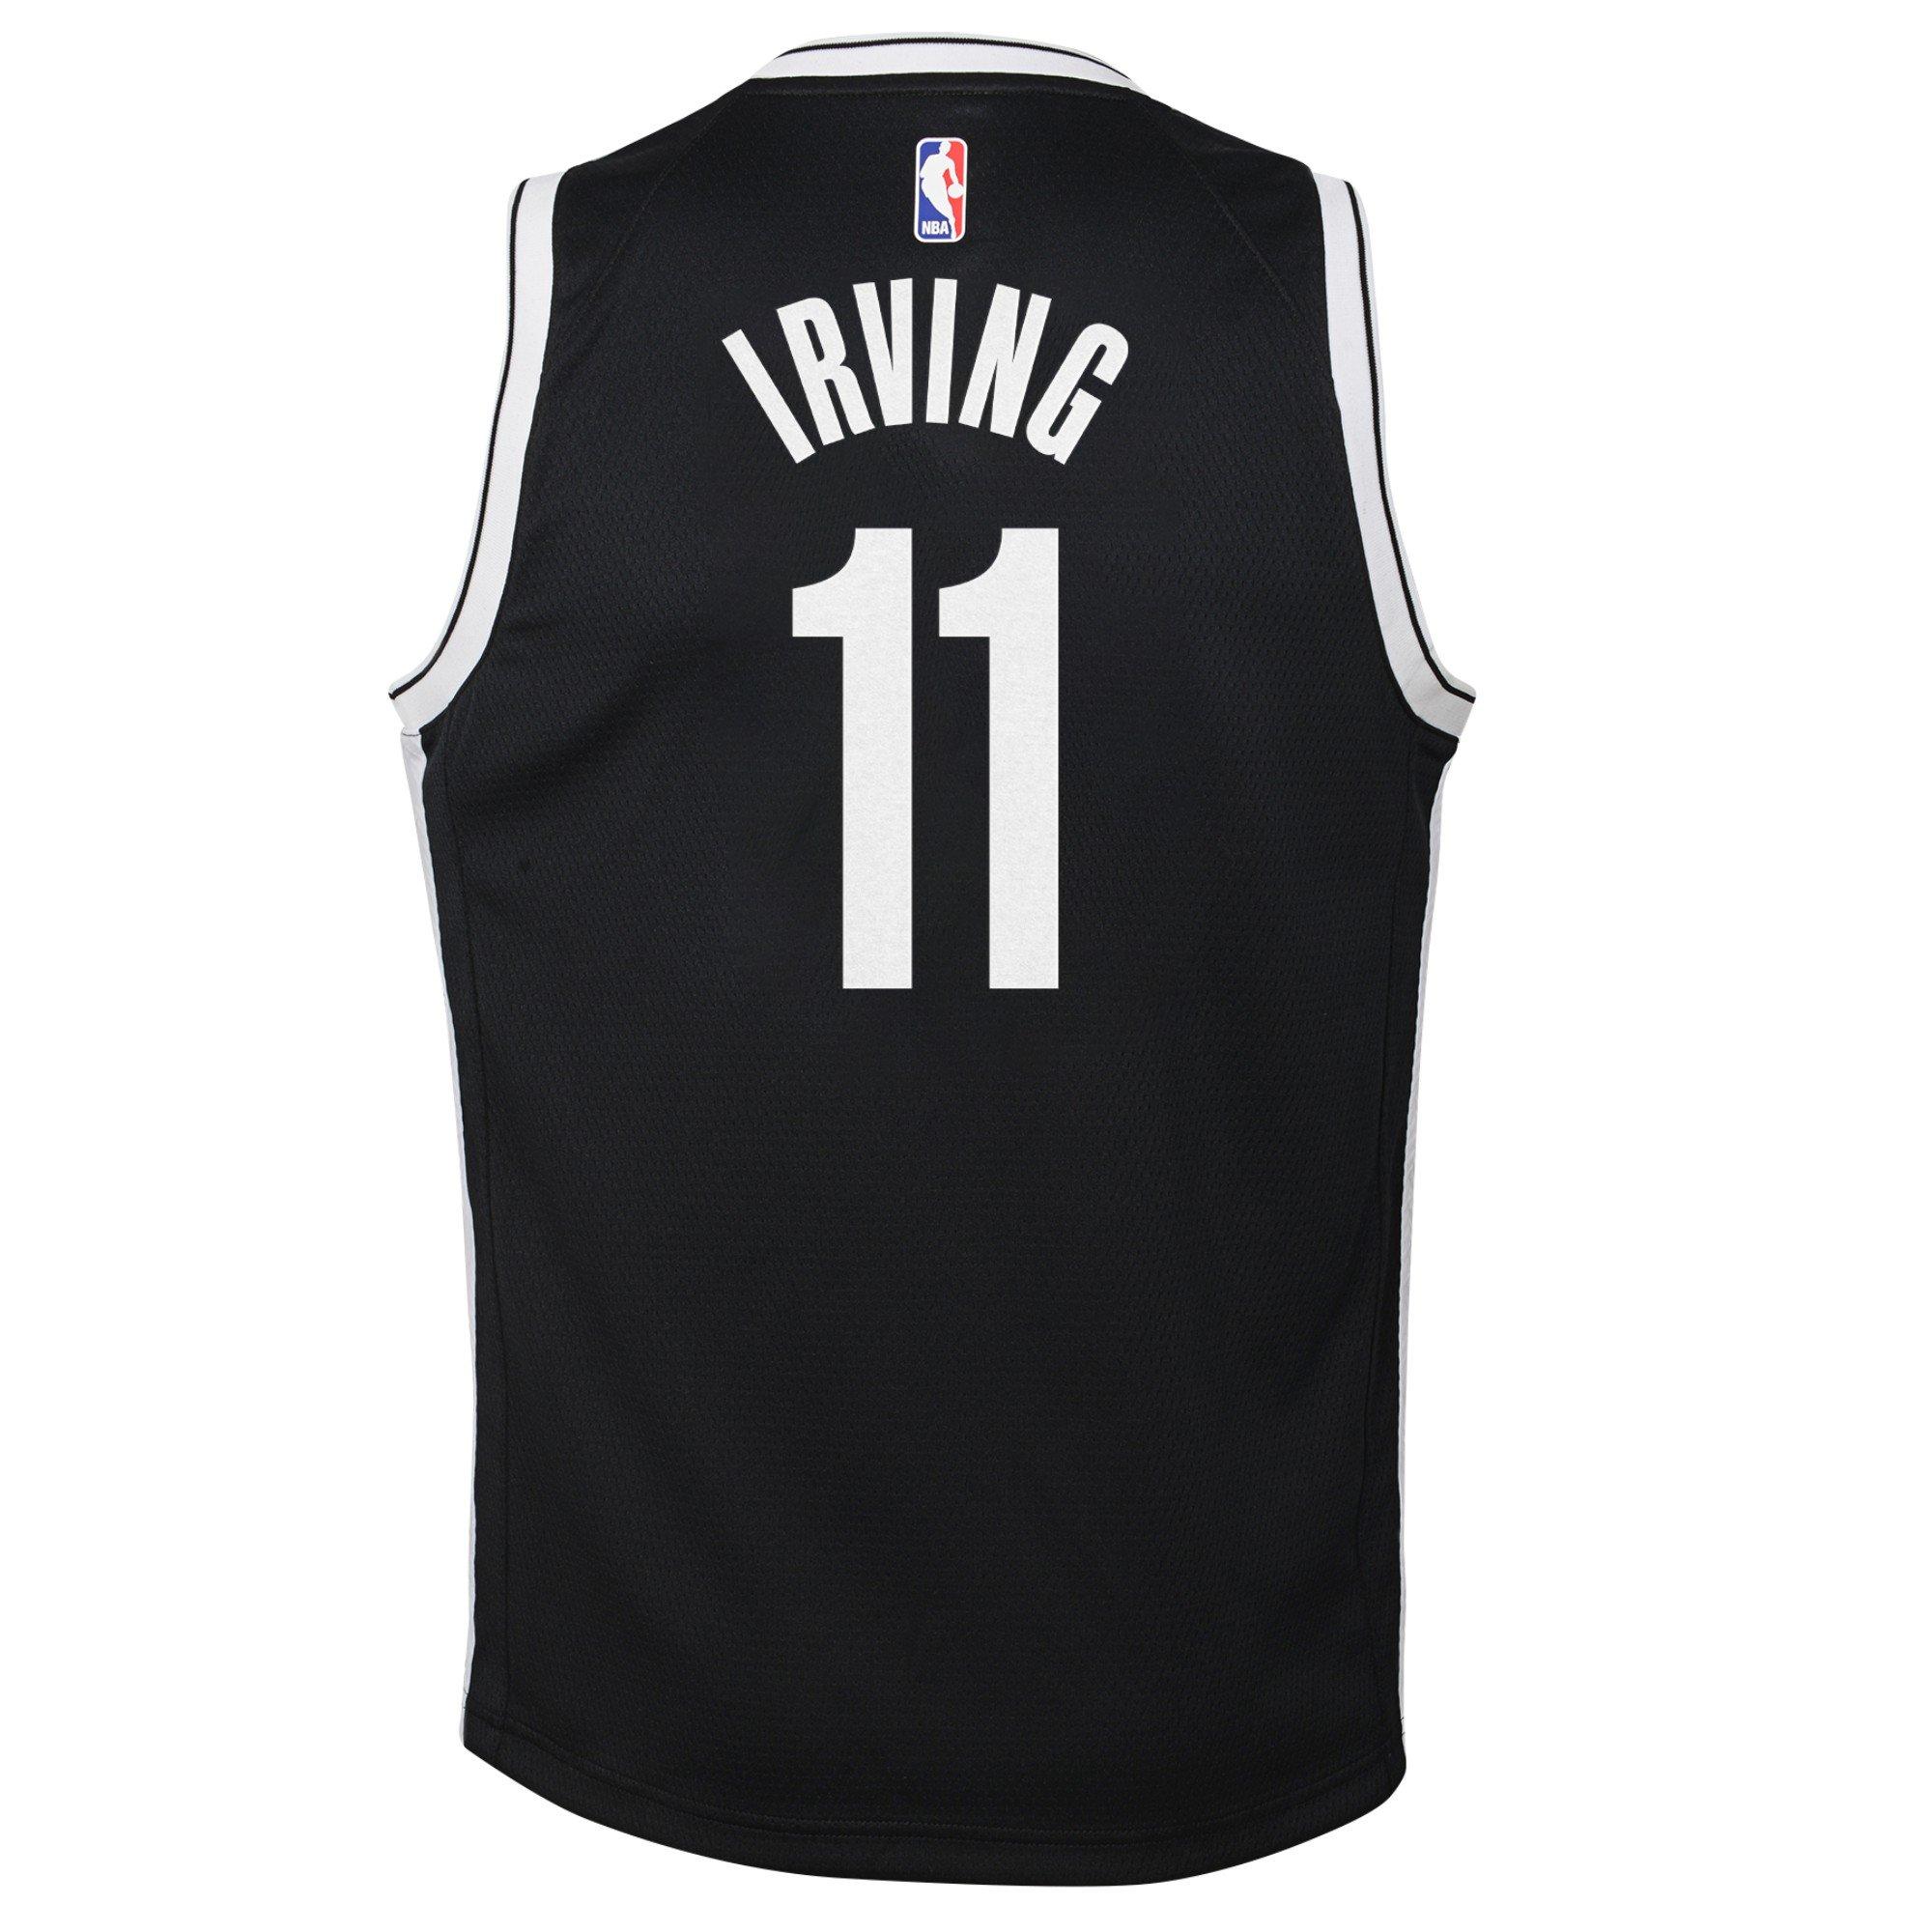 kyrie irving jersey adult